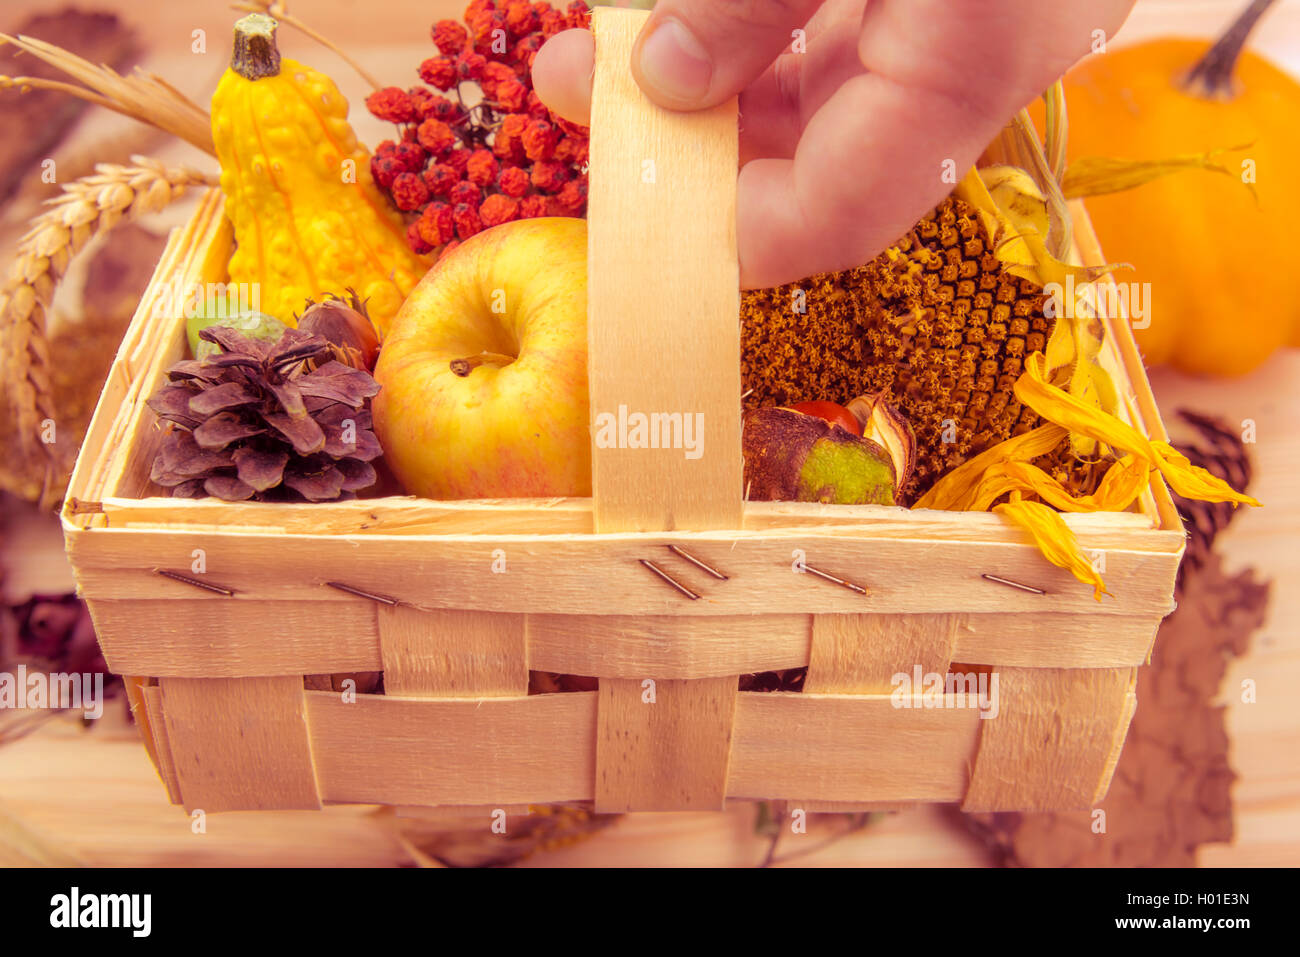 Rustic wooden basket with fall products Stock Photo